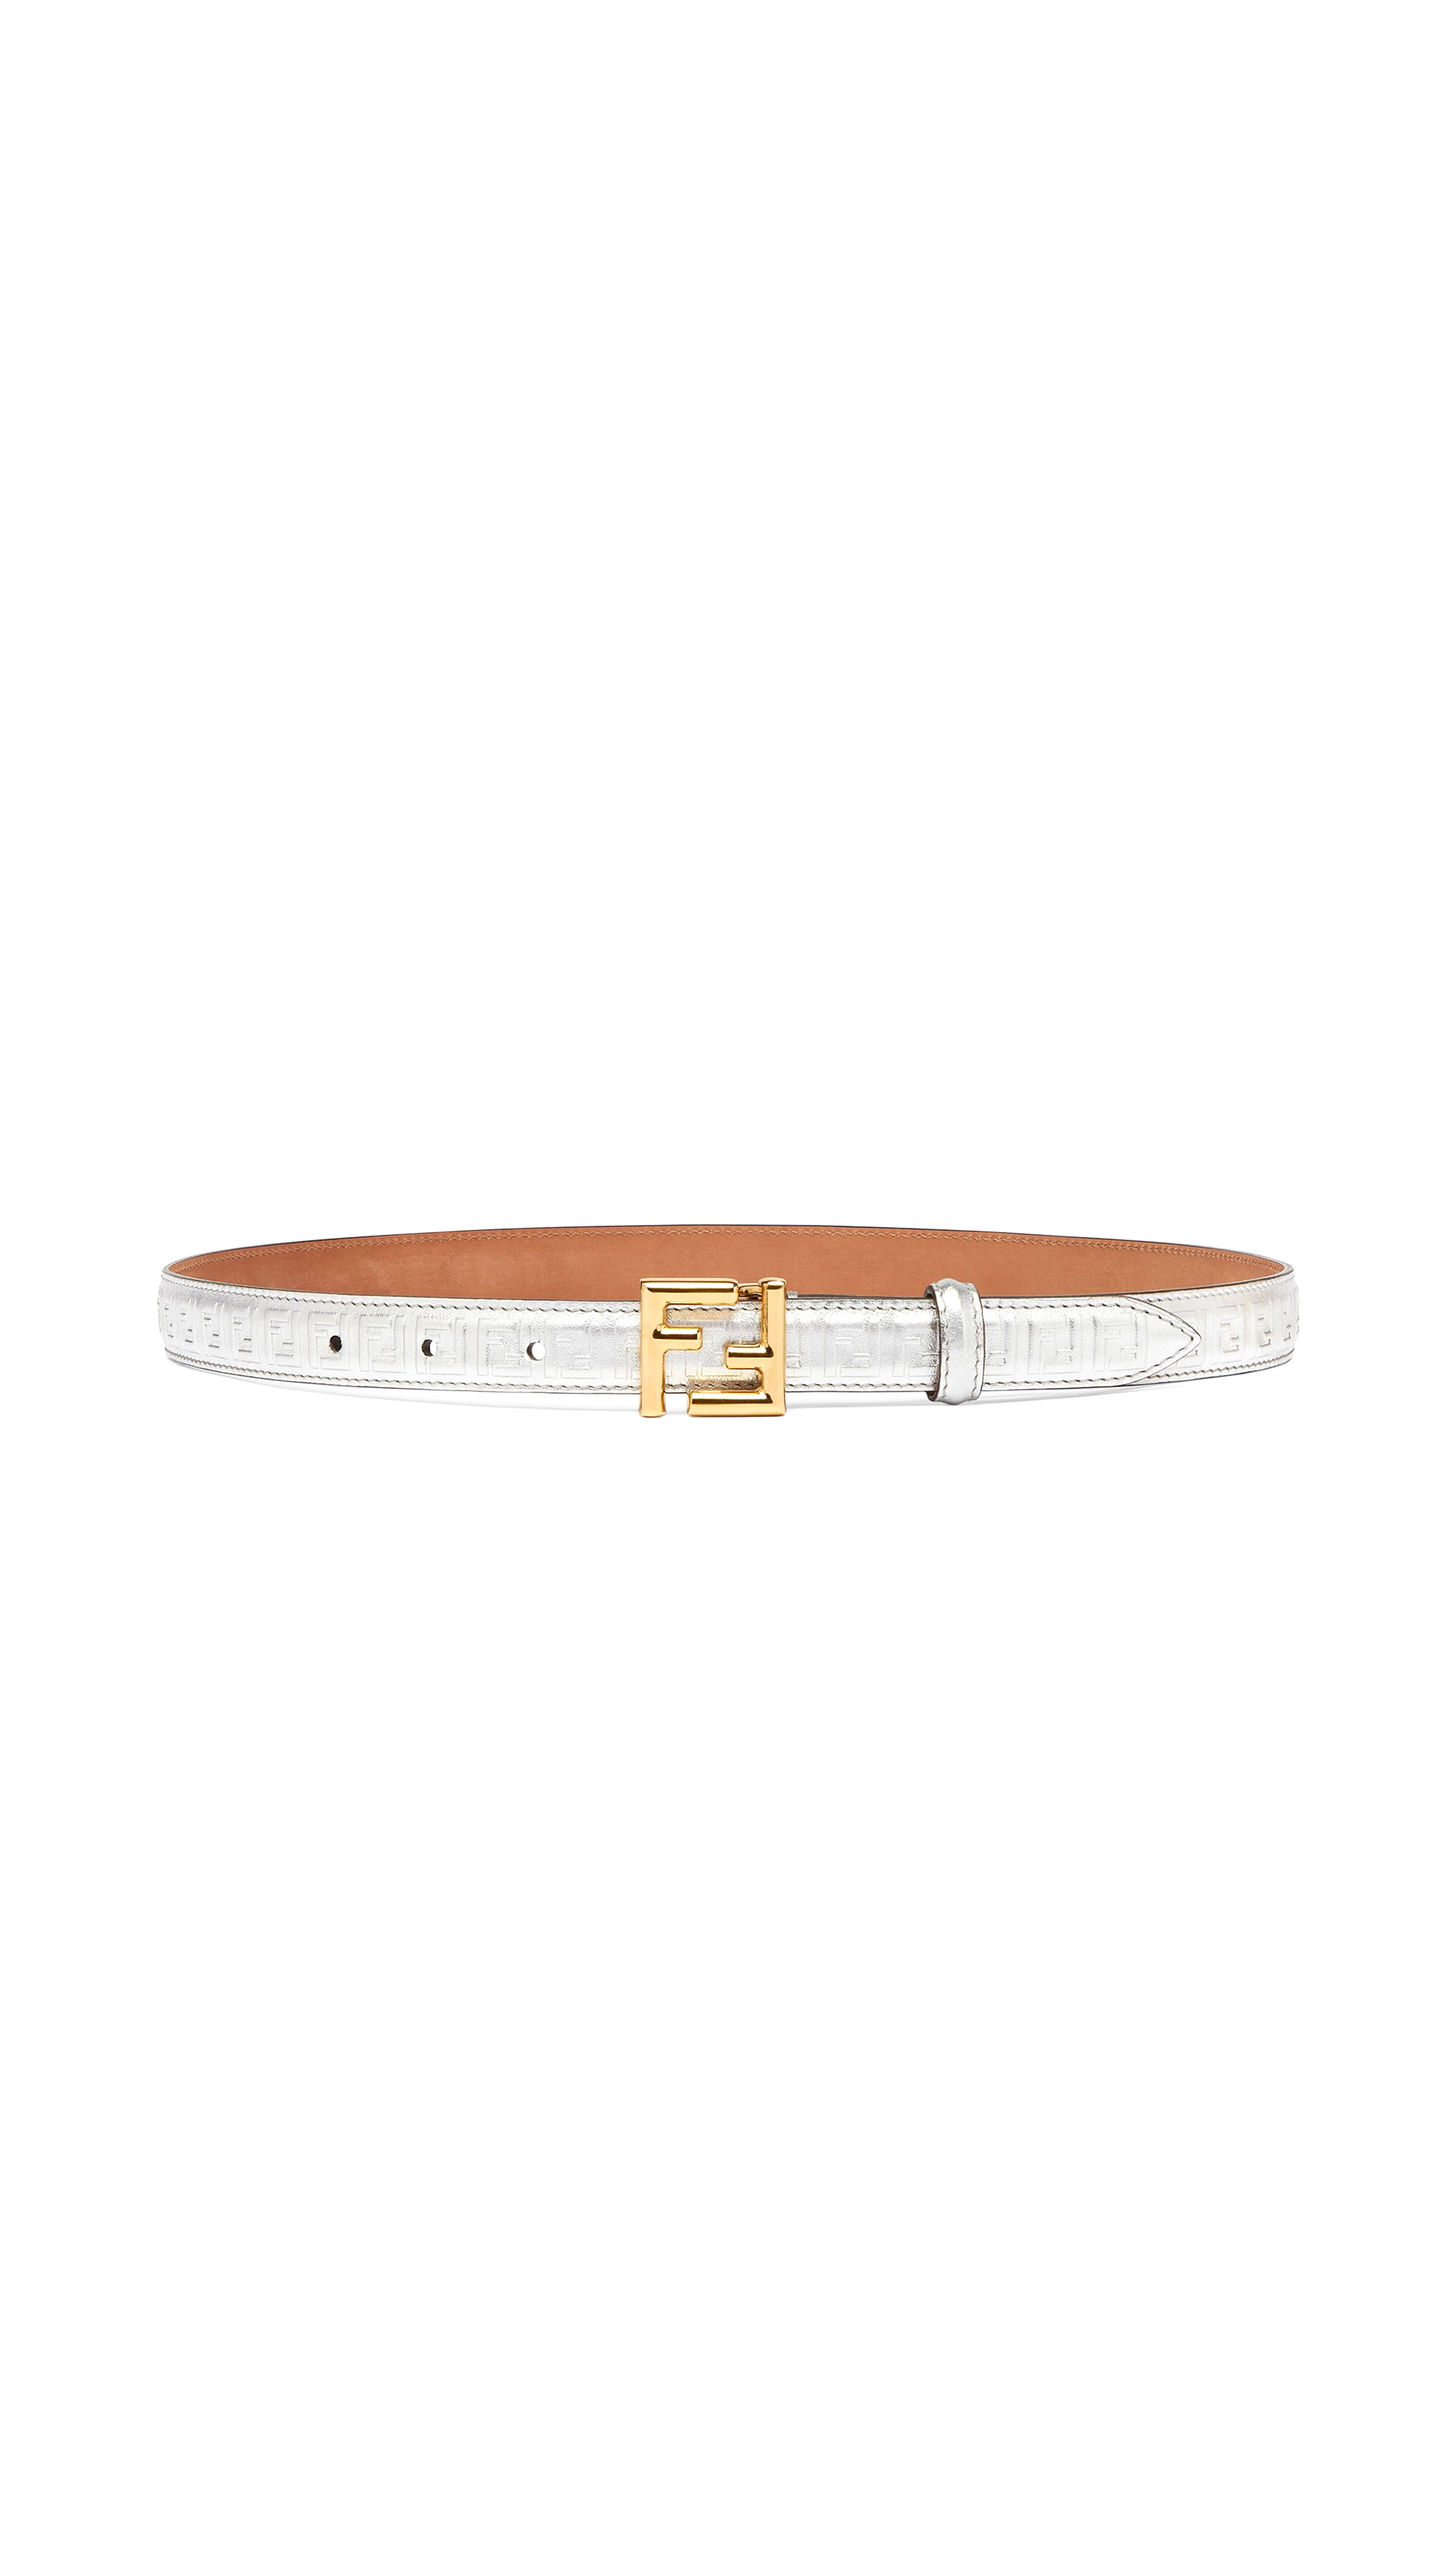 Thin Belt With Loop and FF Stud Buckle - Silver / Gold